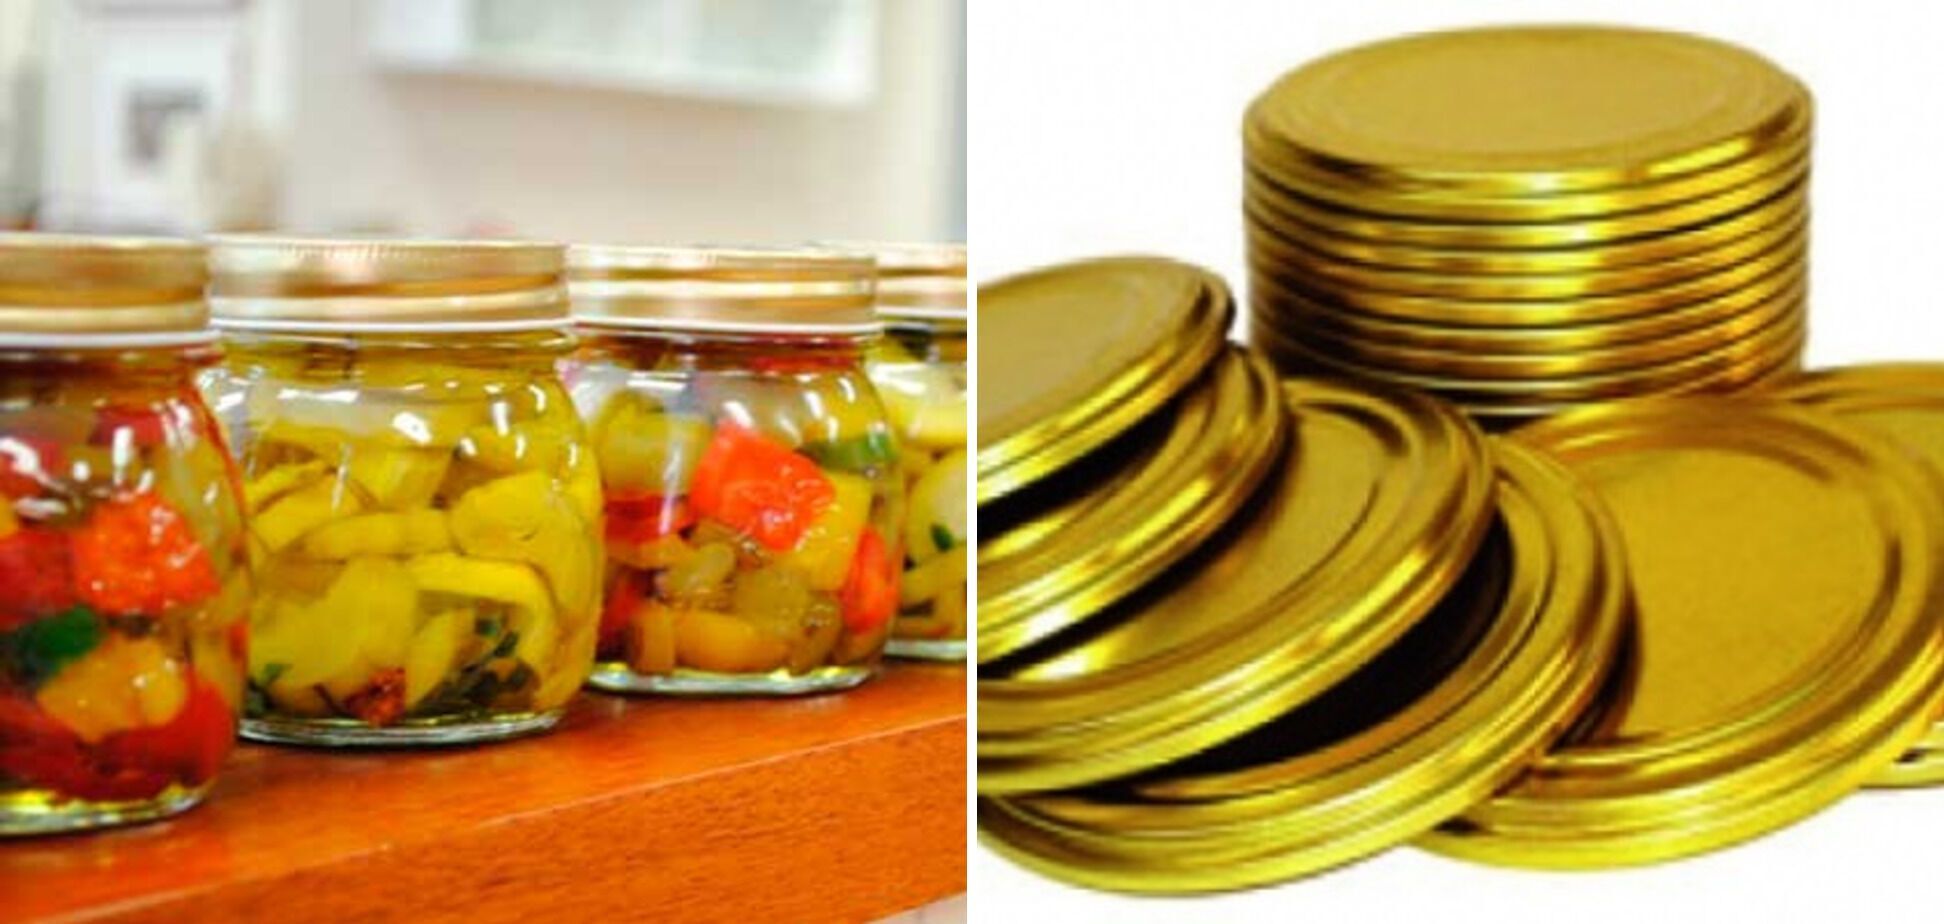 What is the difference between lacquered and unlacquered lids for canning